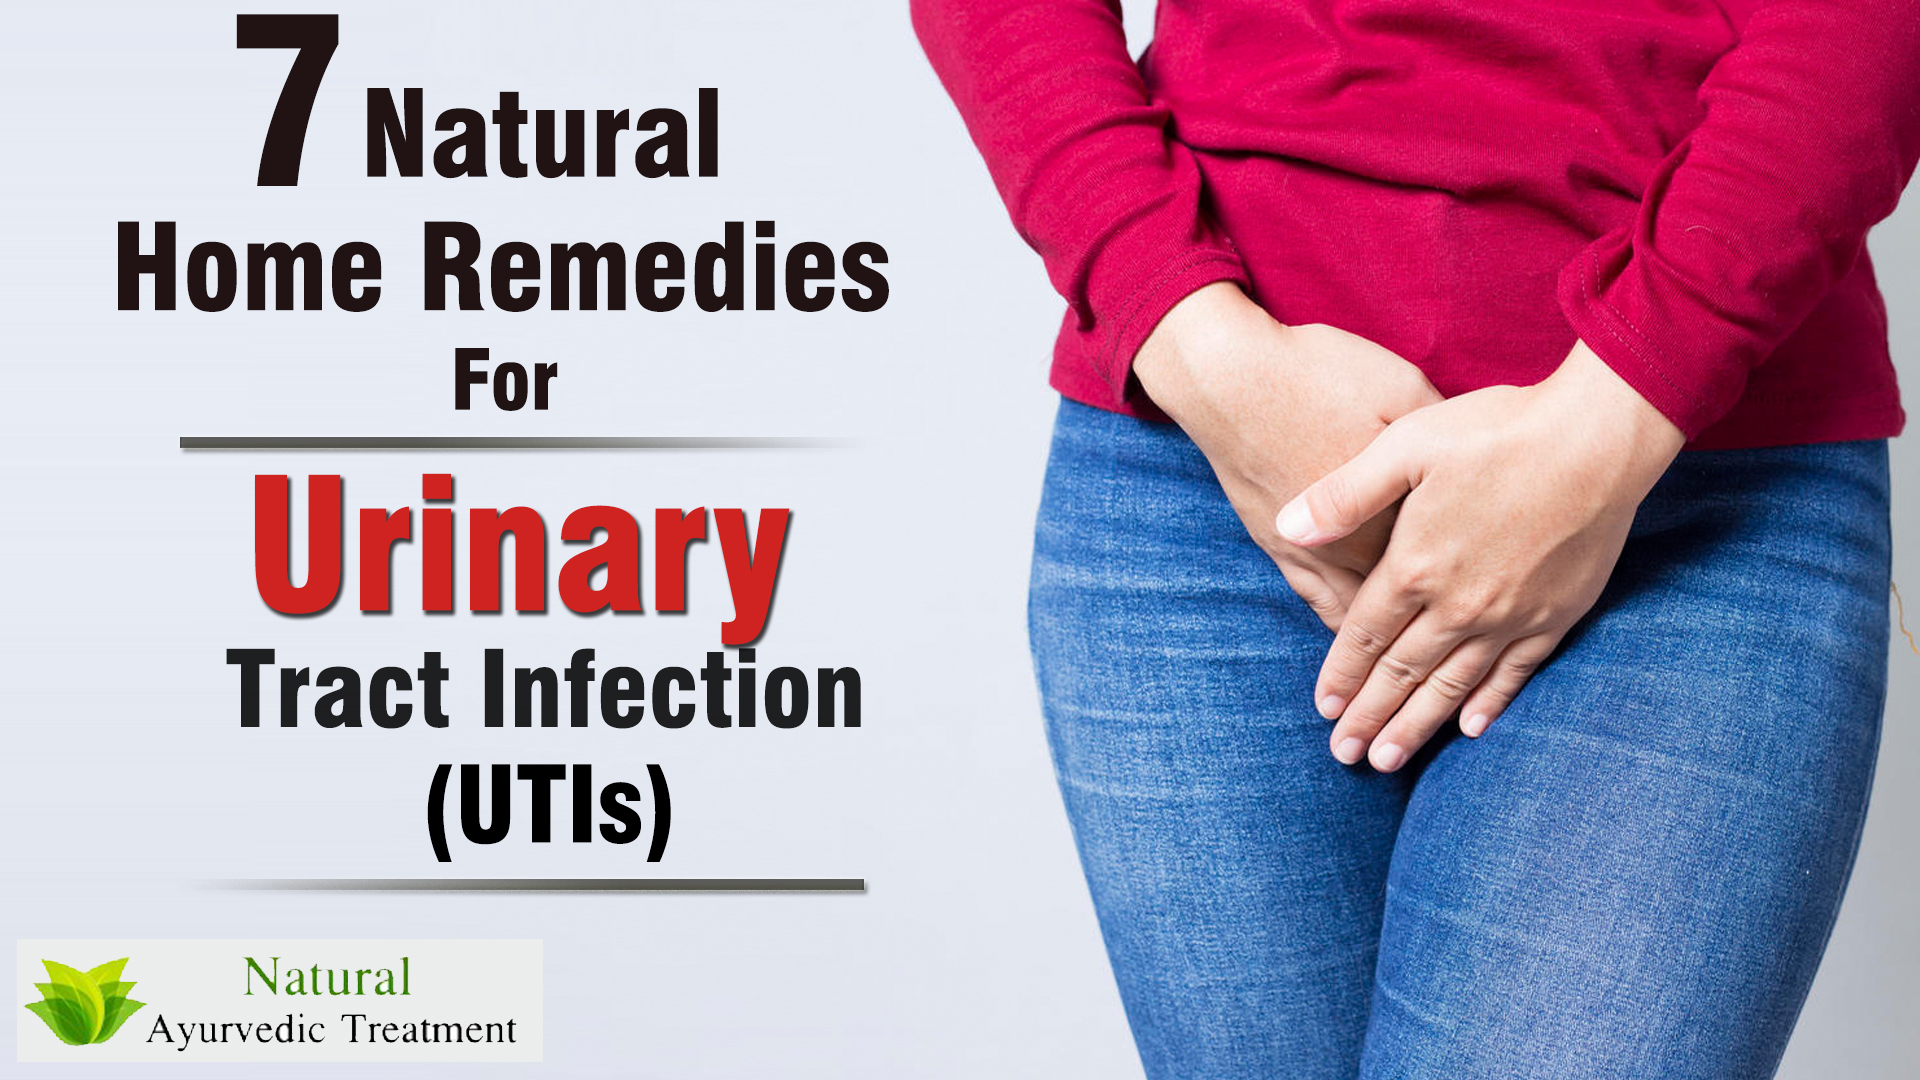 7 Natural Home Remedies for Urinary Tract Infection